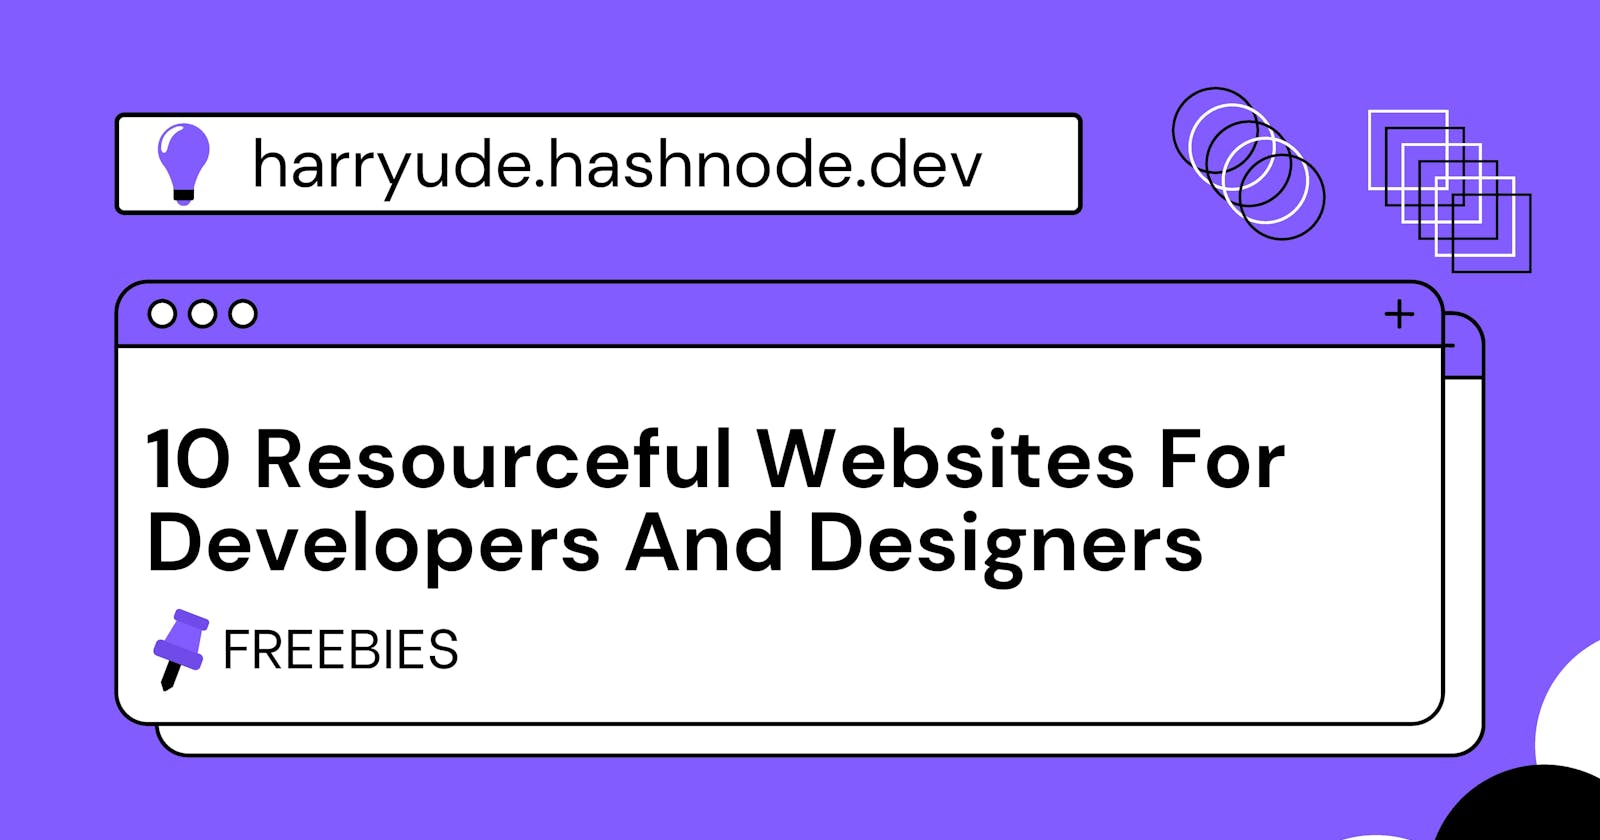 10 Resourceful Websites For Developers And Designers